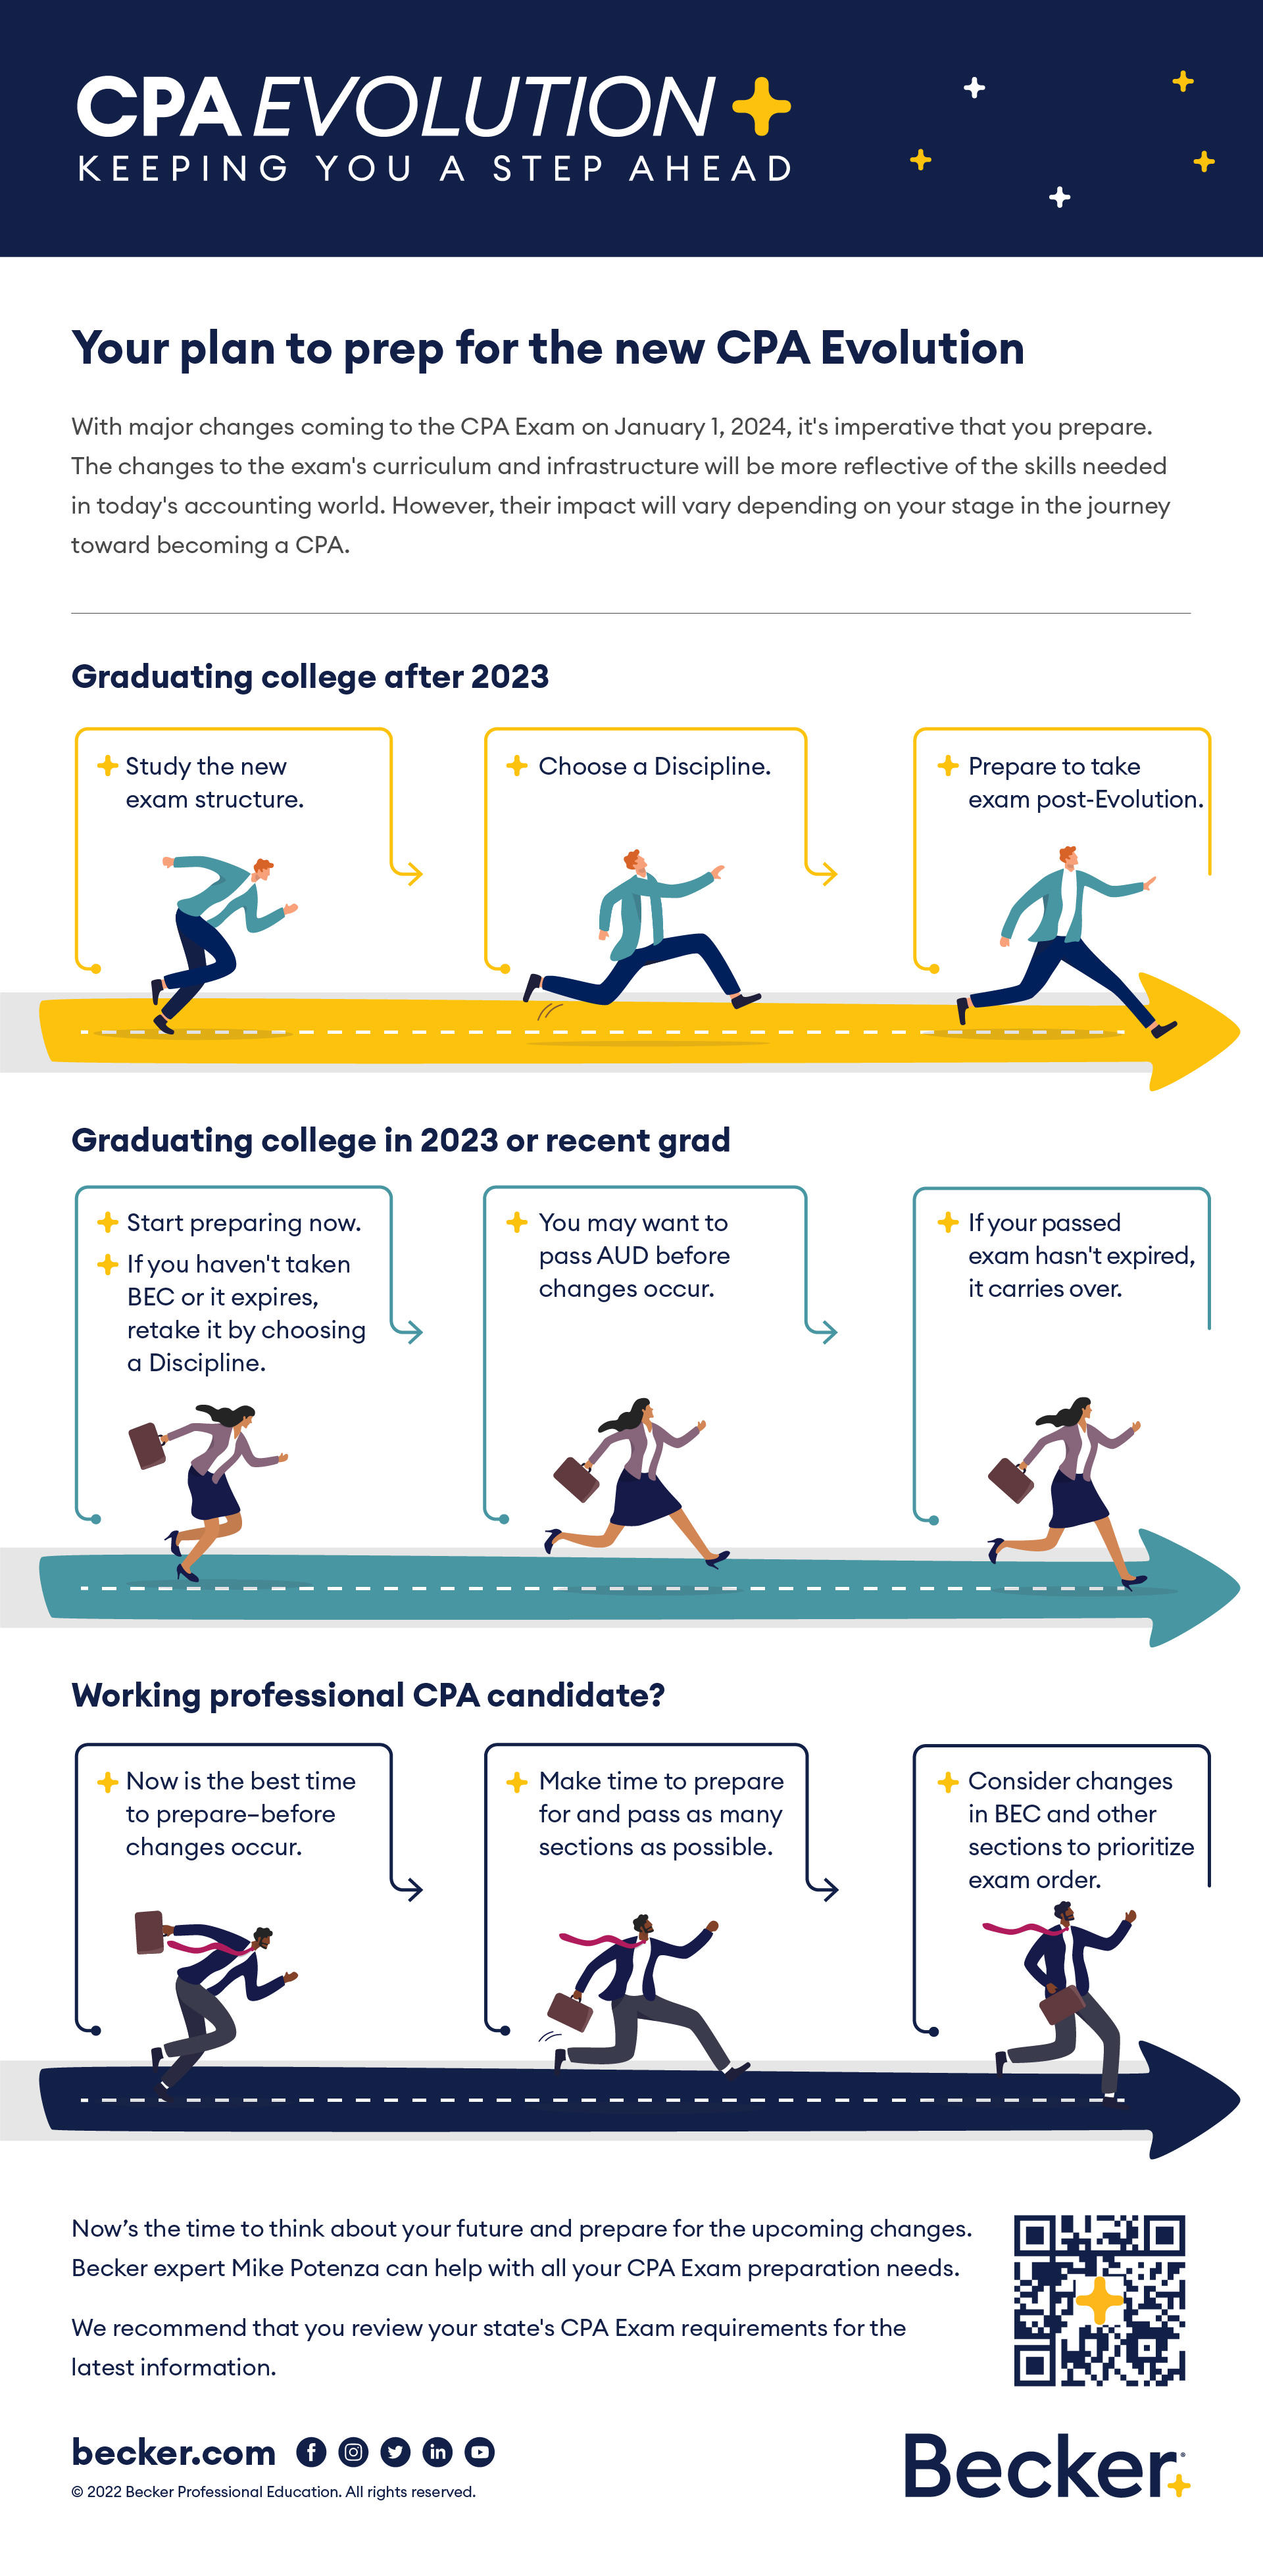 How to plan and prepare for the new CPA Exam amid the CPA Evolution